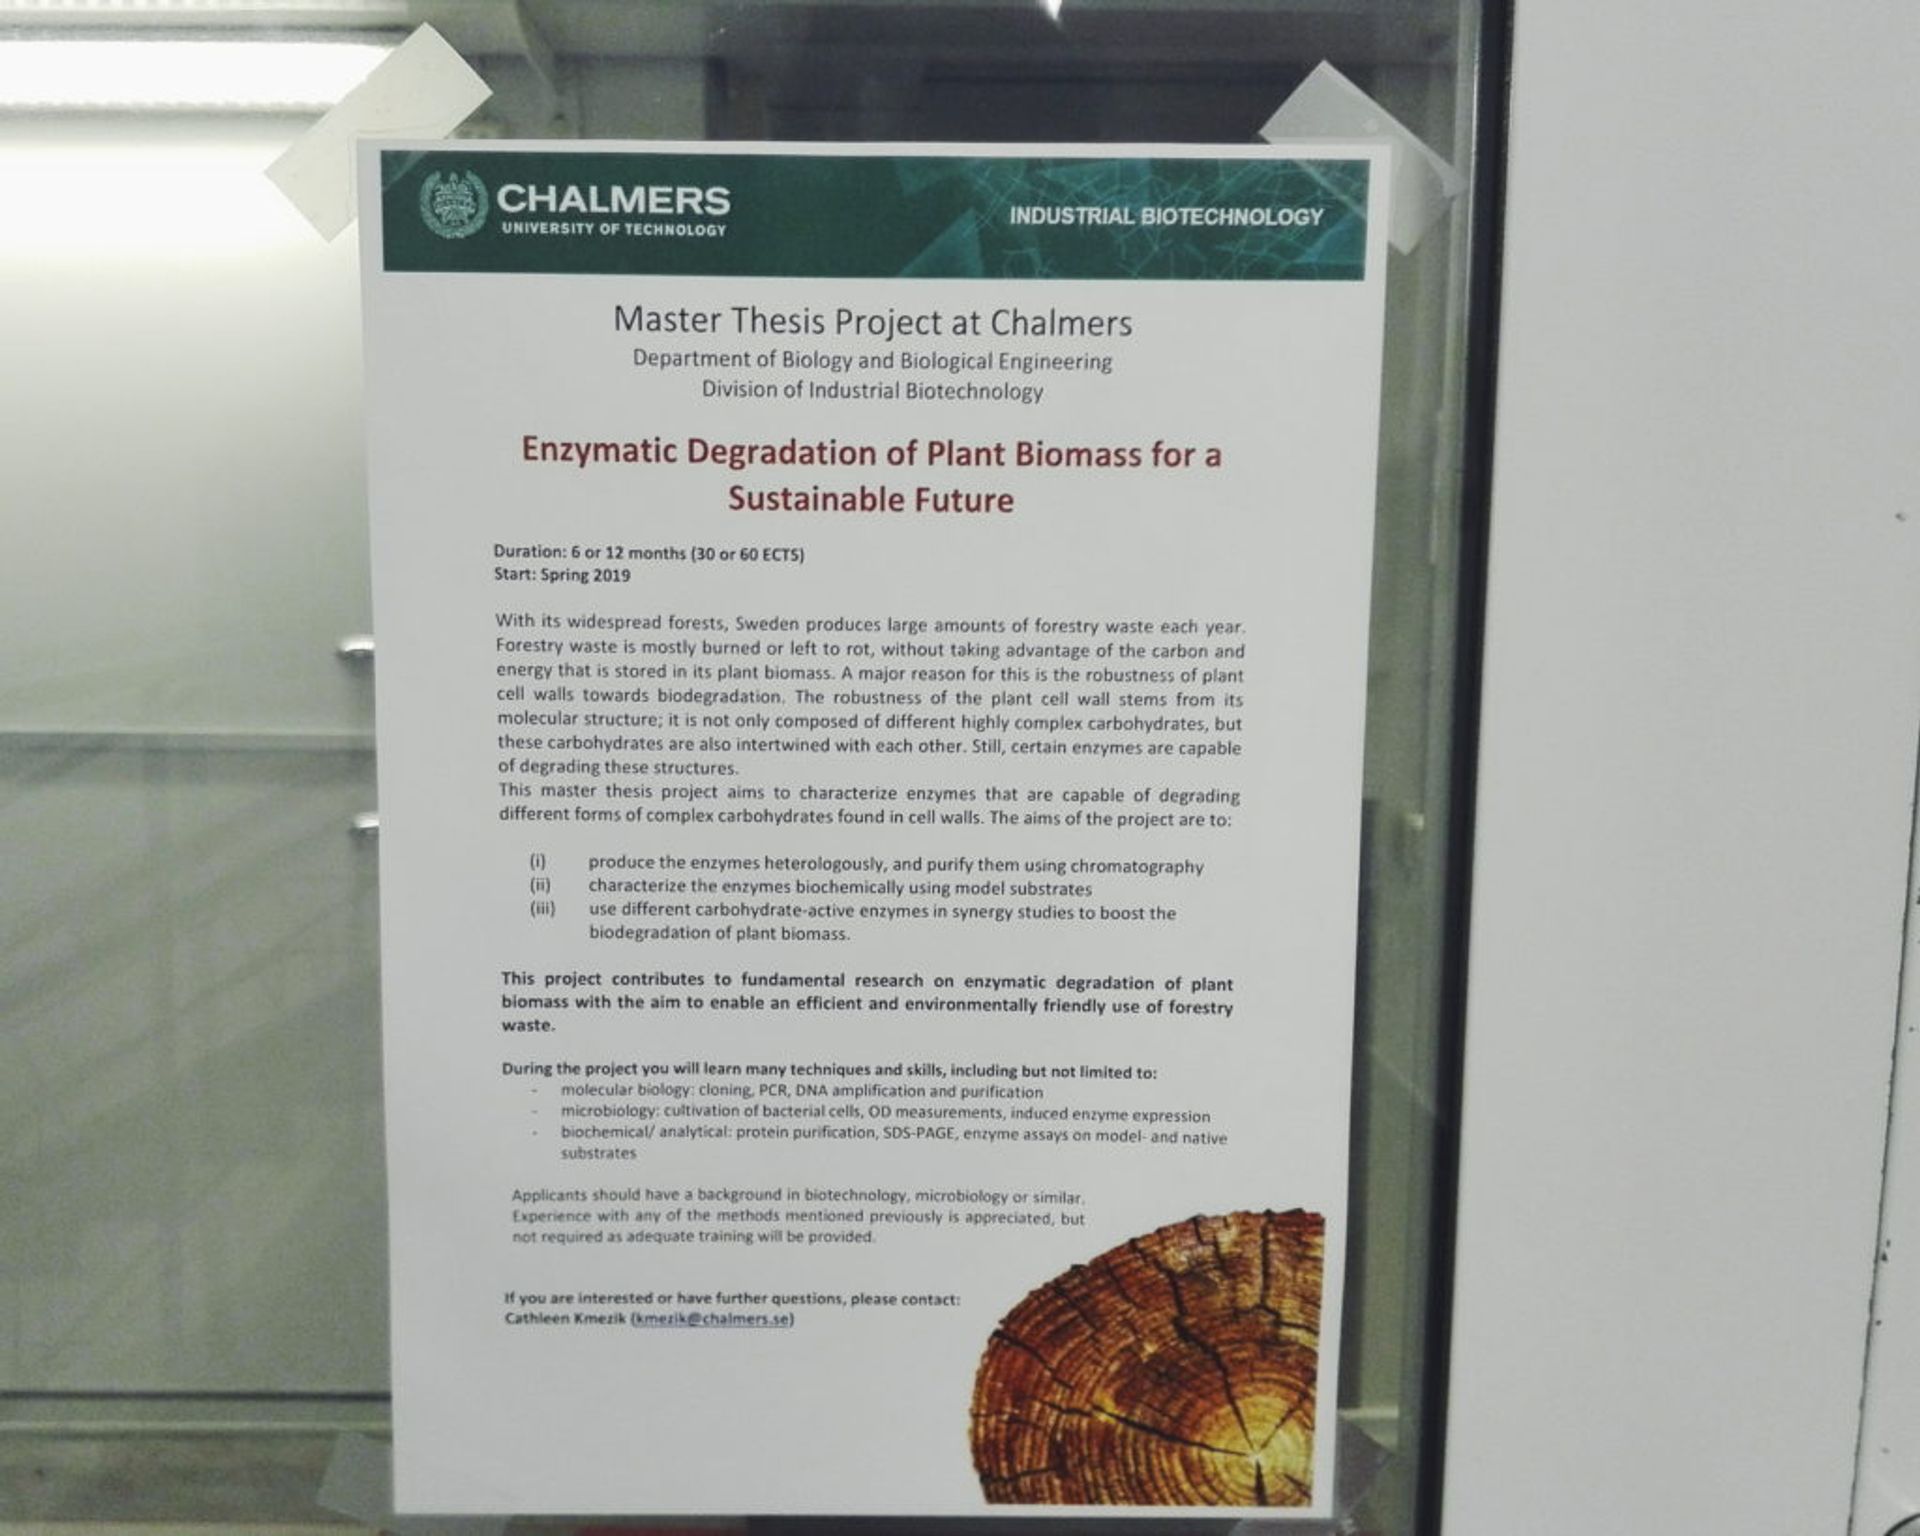 Poster advertising an available master thesis position.